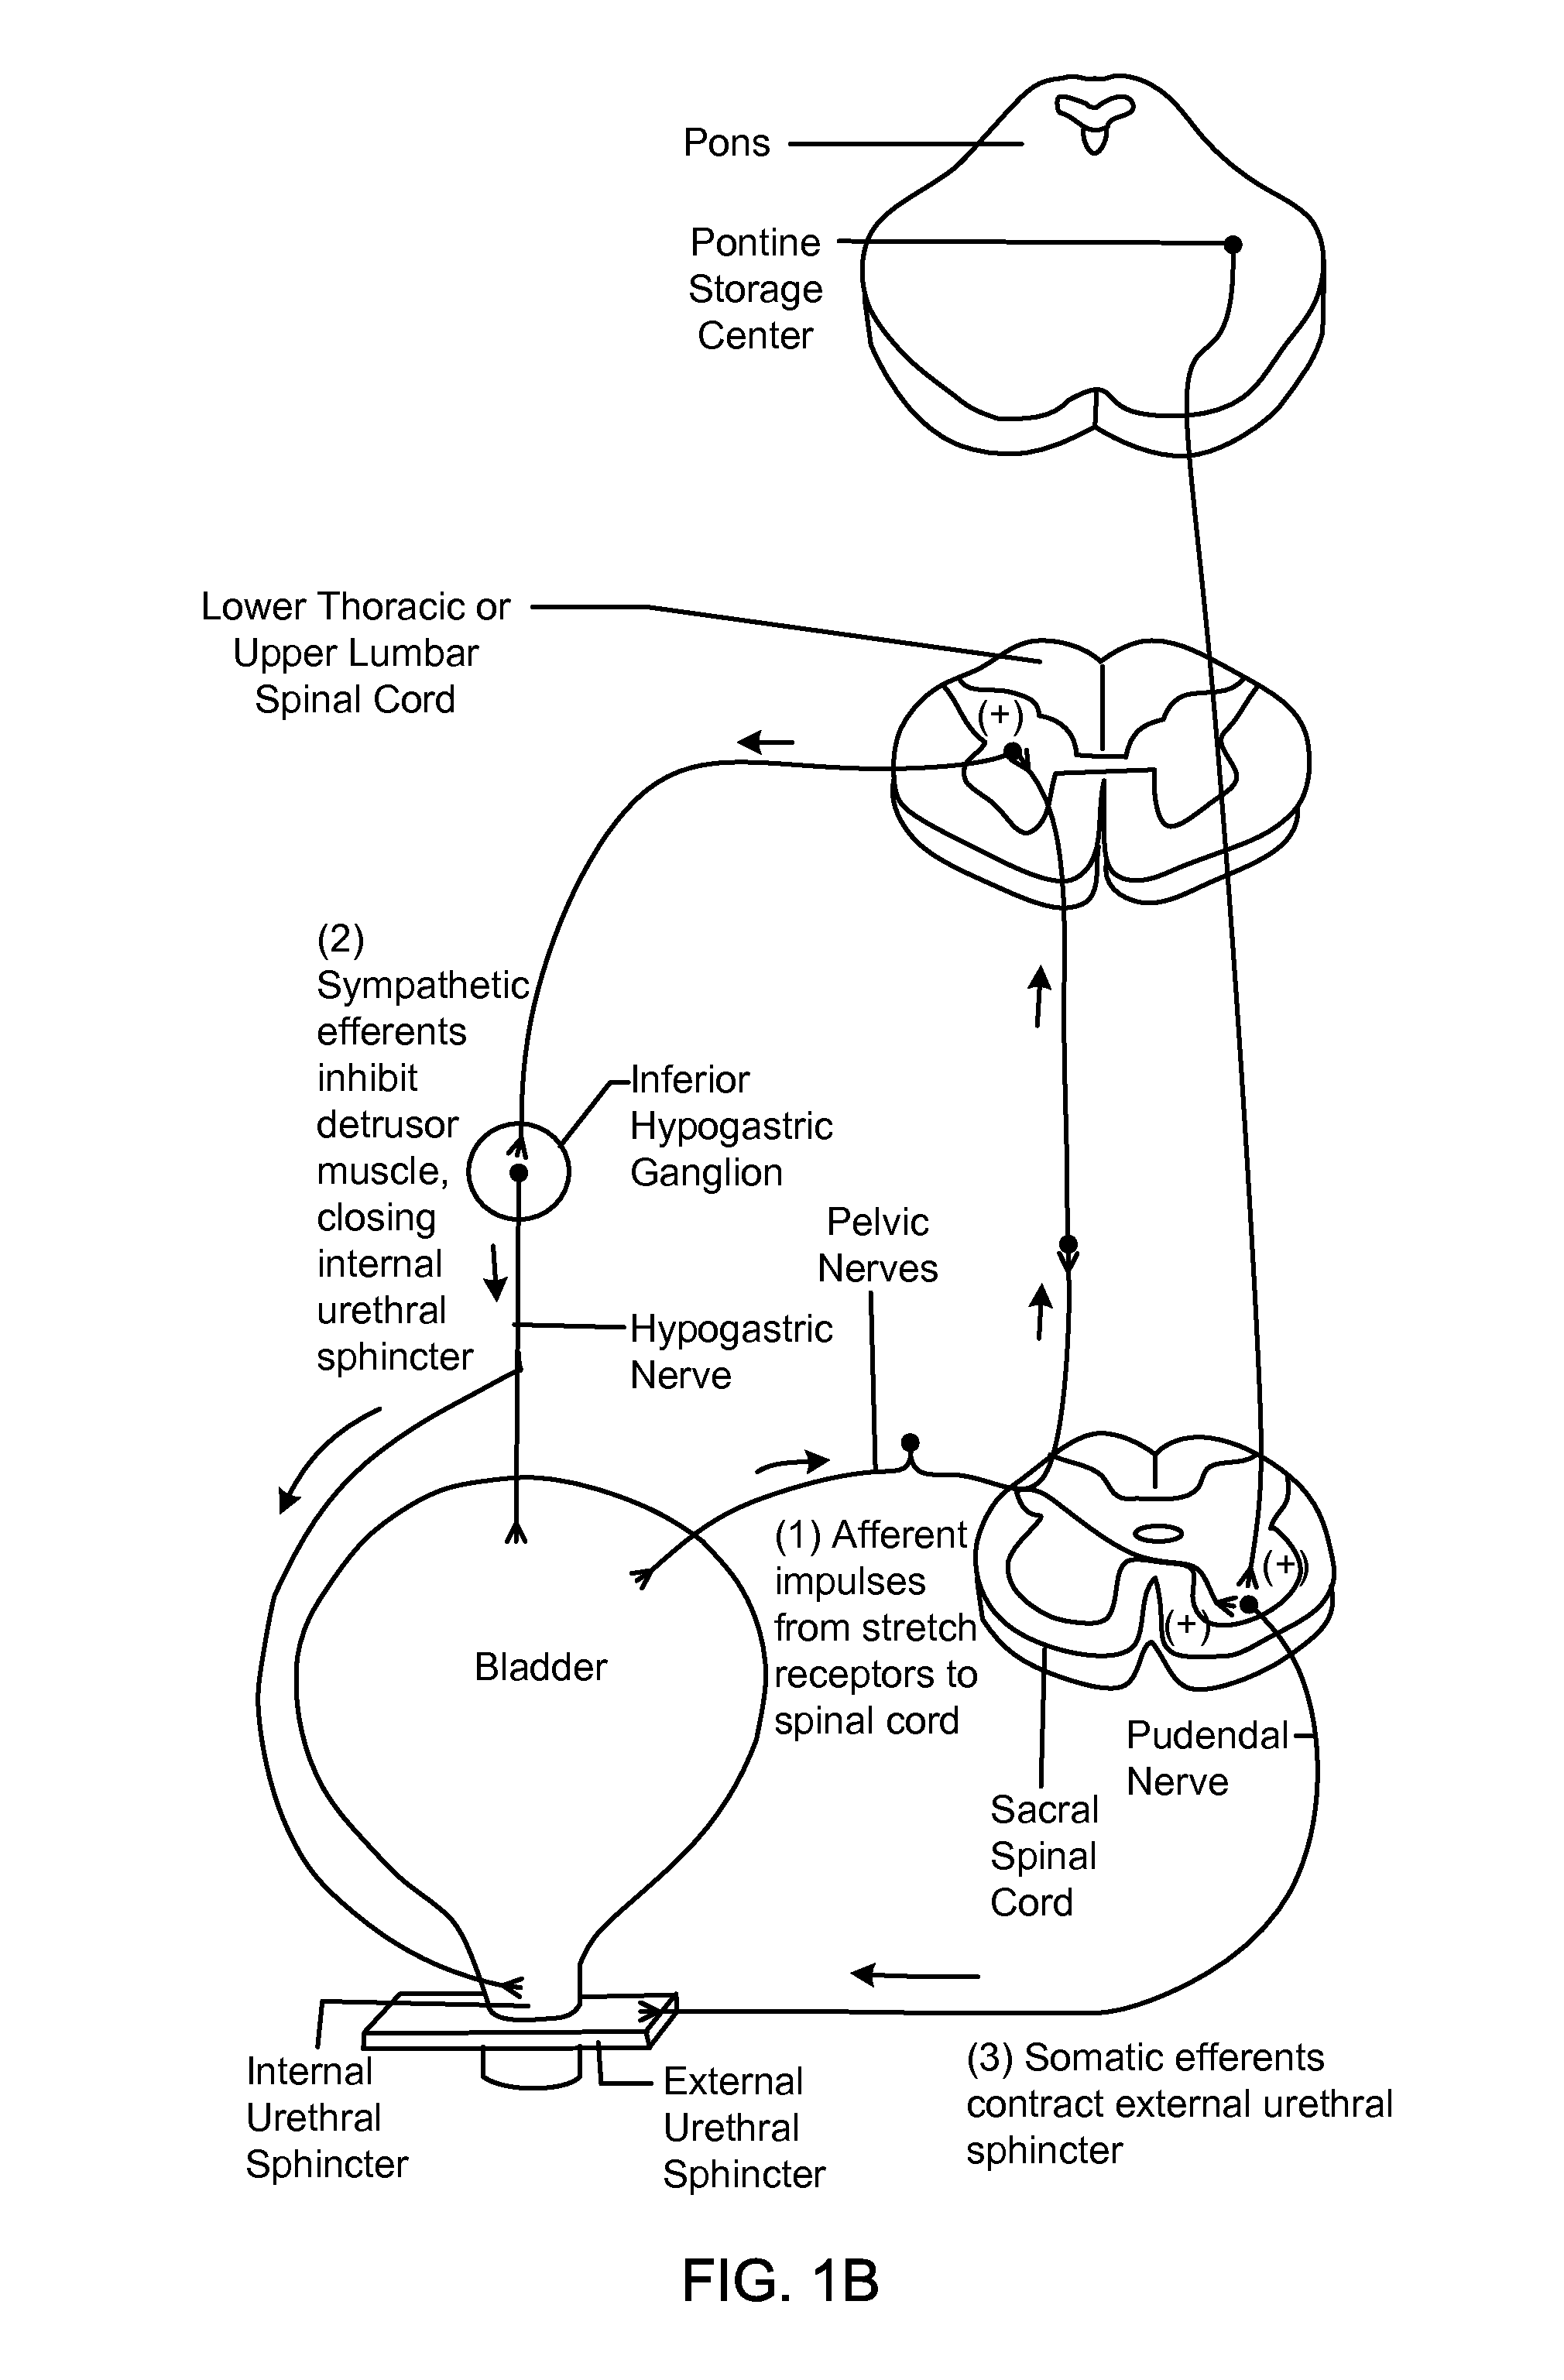 Electrical neuromodulation stimulation system and method for treating urinary incontinence